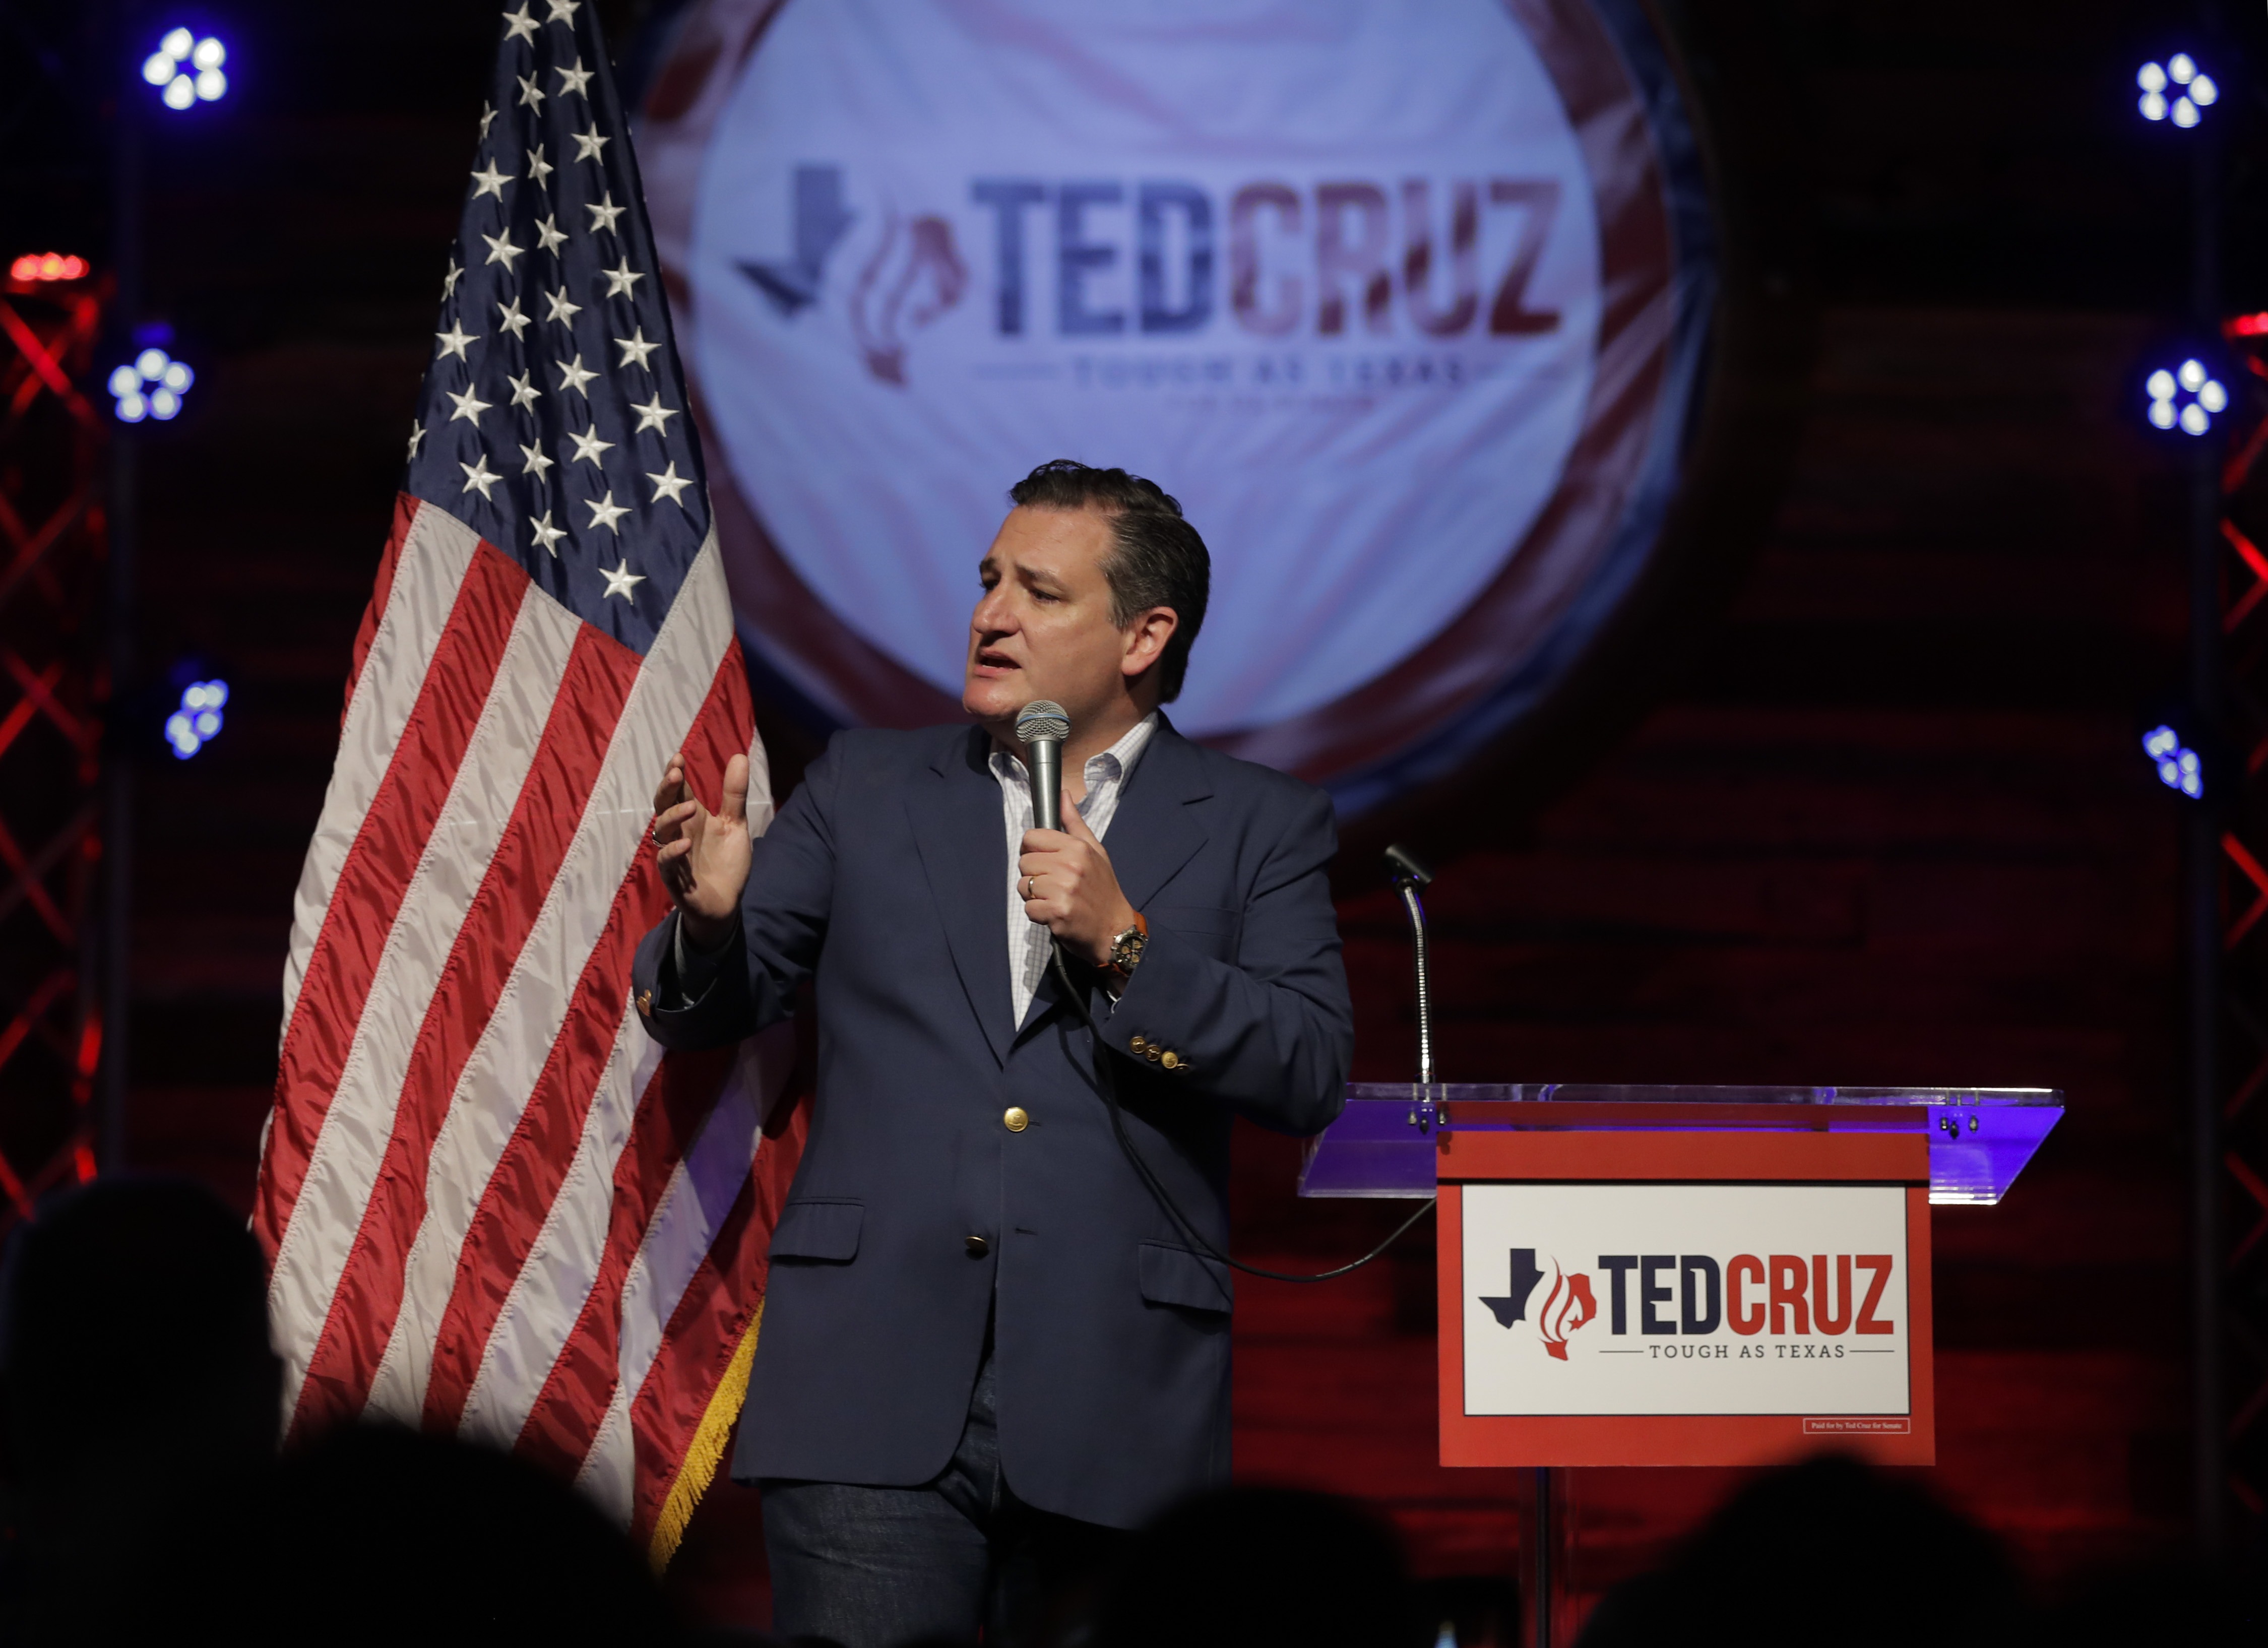 STAFFORD, TX - APRIL 2: Sen. Ted Cruz (R-TX) speaks during a rally to launch his re-election campaign at the Redneck Country Club on April 2, 2018 in Stafford, Texas. Cruz is defending his bid for a second term as Texas' junior senator against Democratic U.S. Rep. Beto O'Rourke. (Photo by Erich Schlegel/Getty Images)